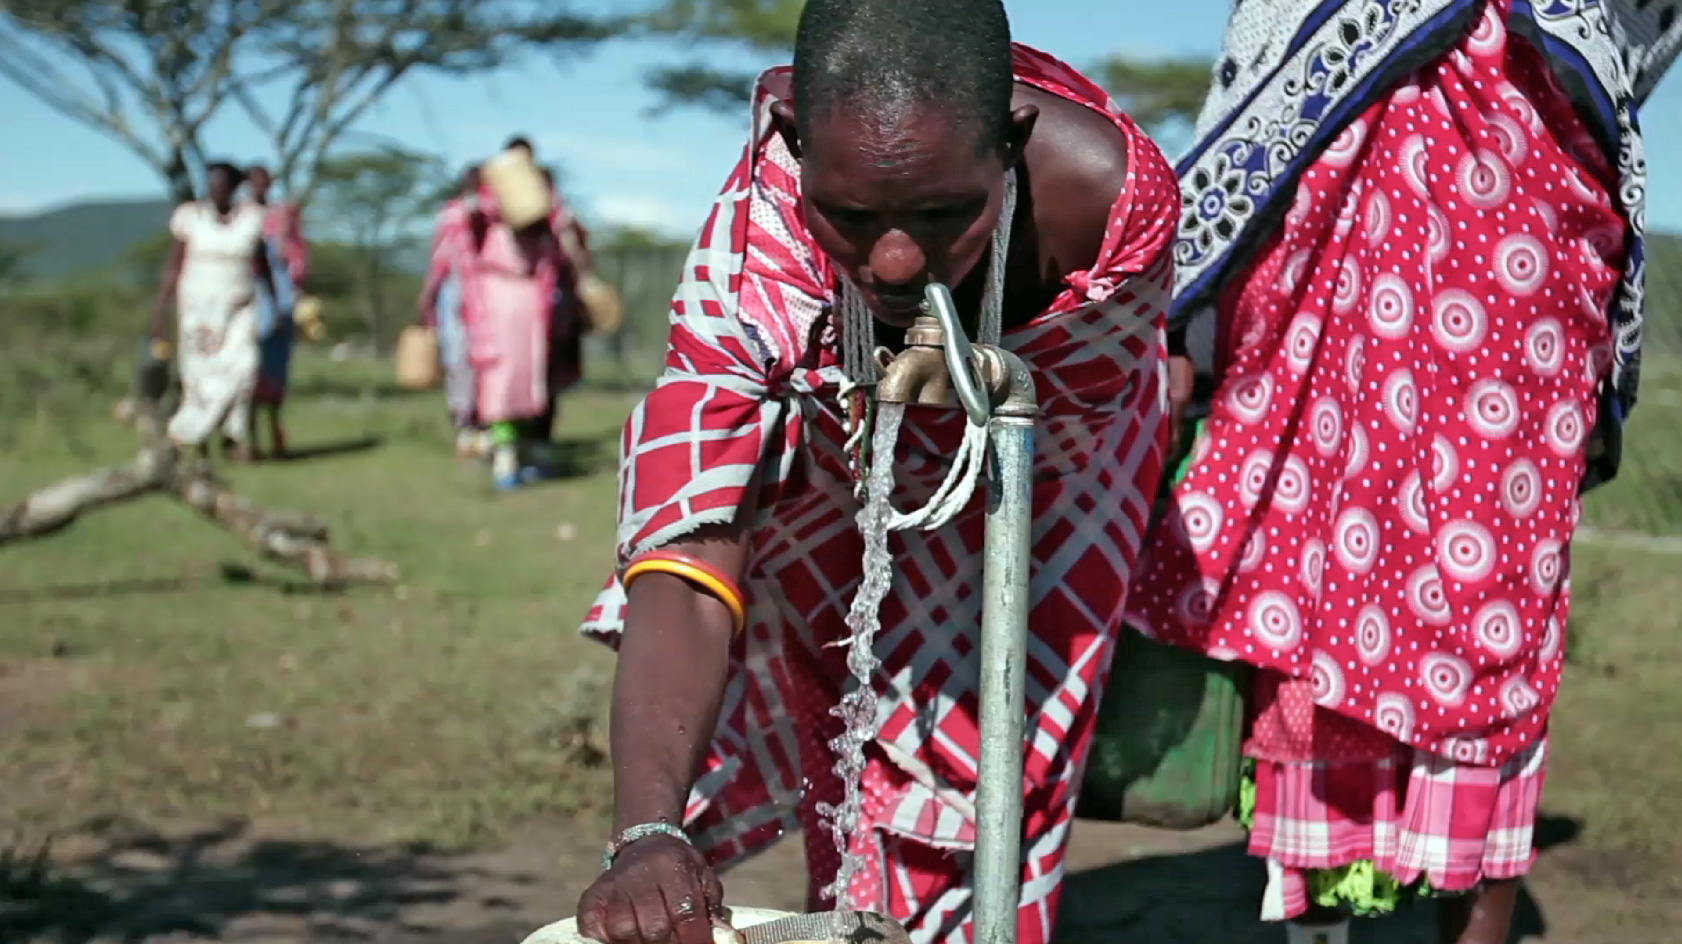 maasai women at FoTZC borehole to collect clean water for their families